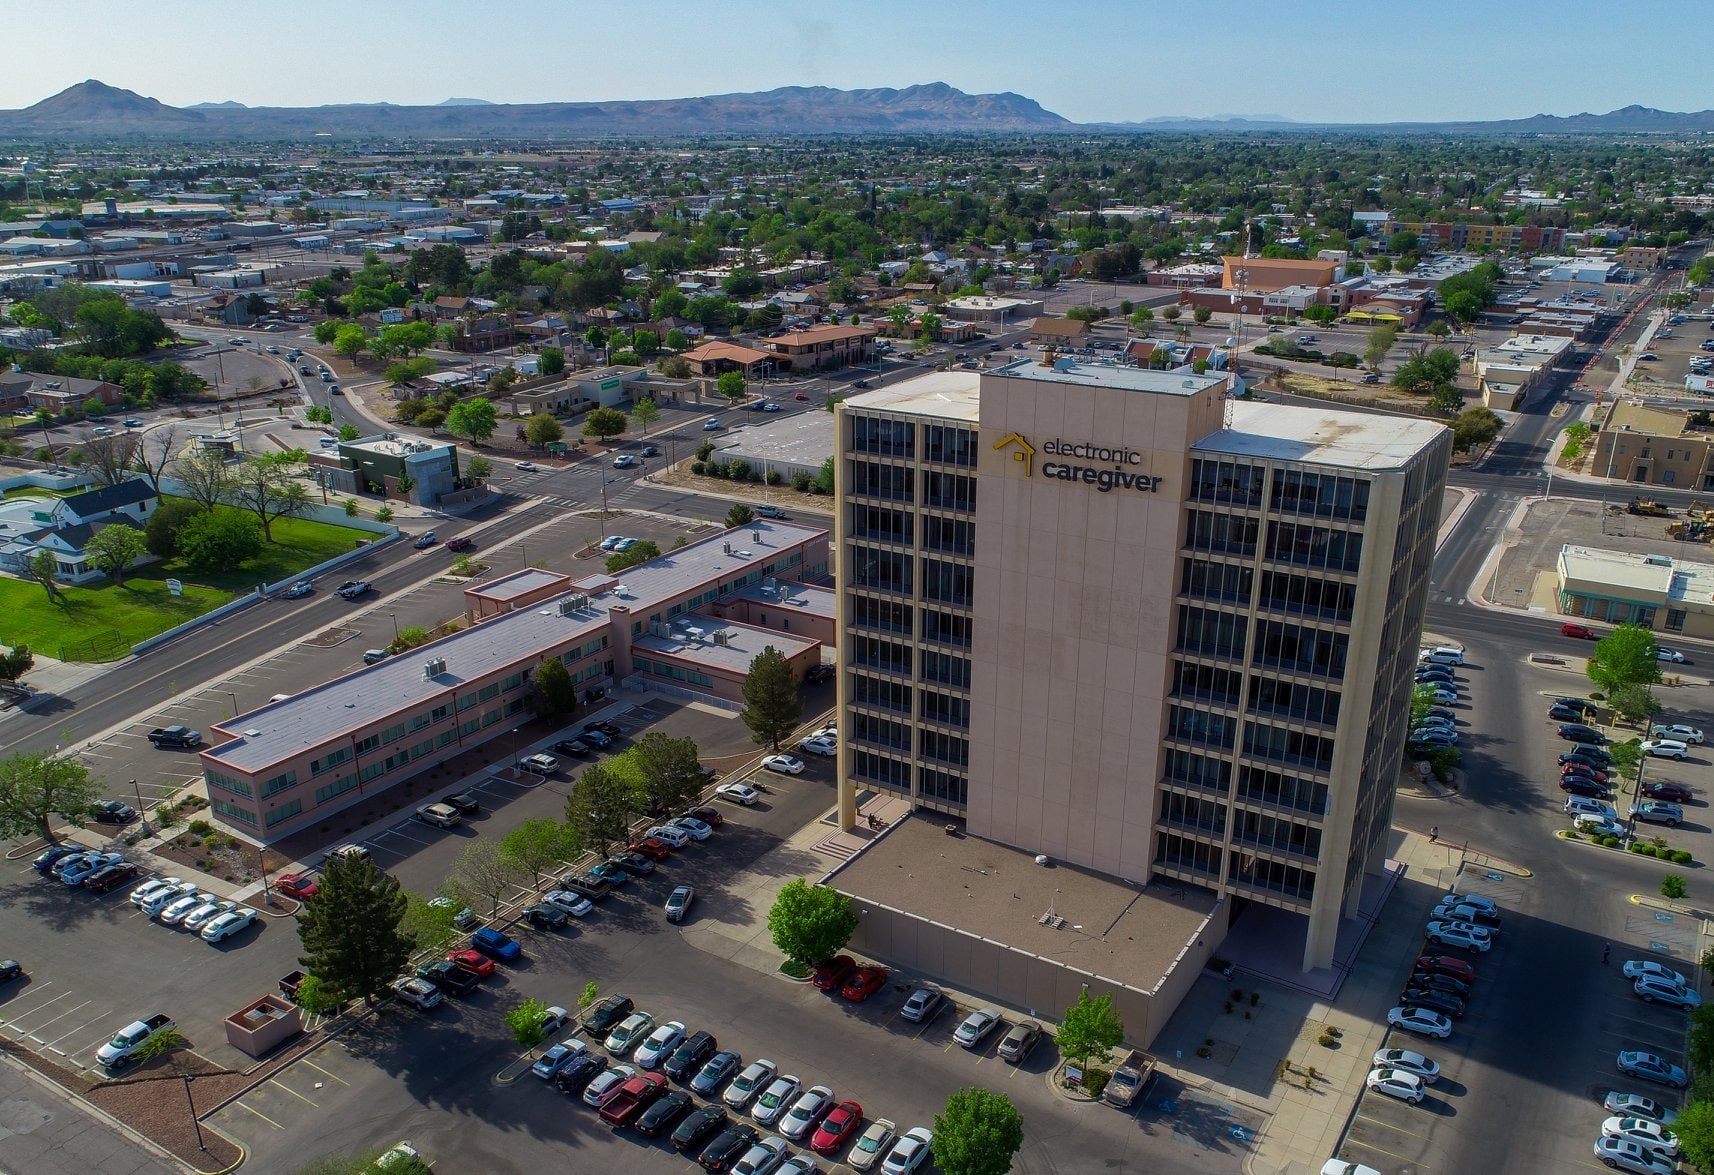 Electronic Caregiver Building High Rise Image from Drone